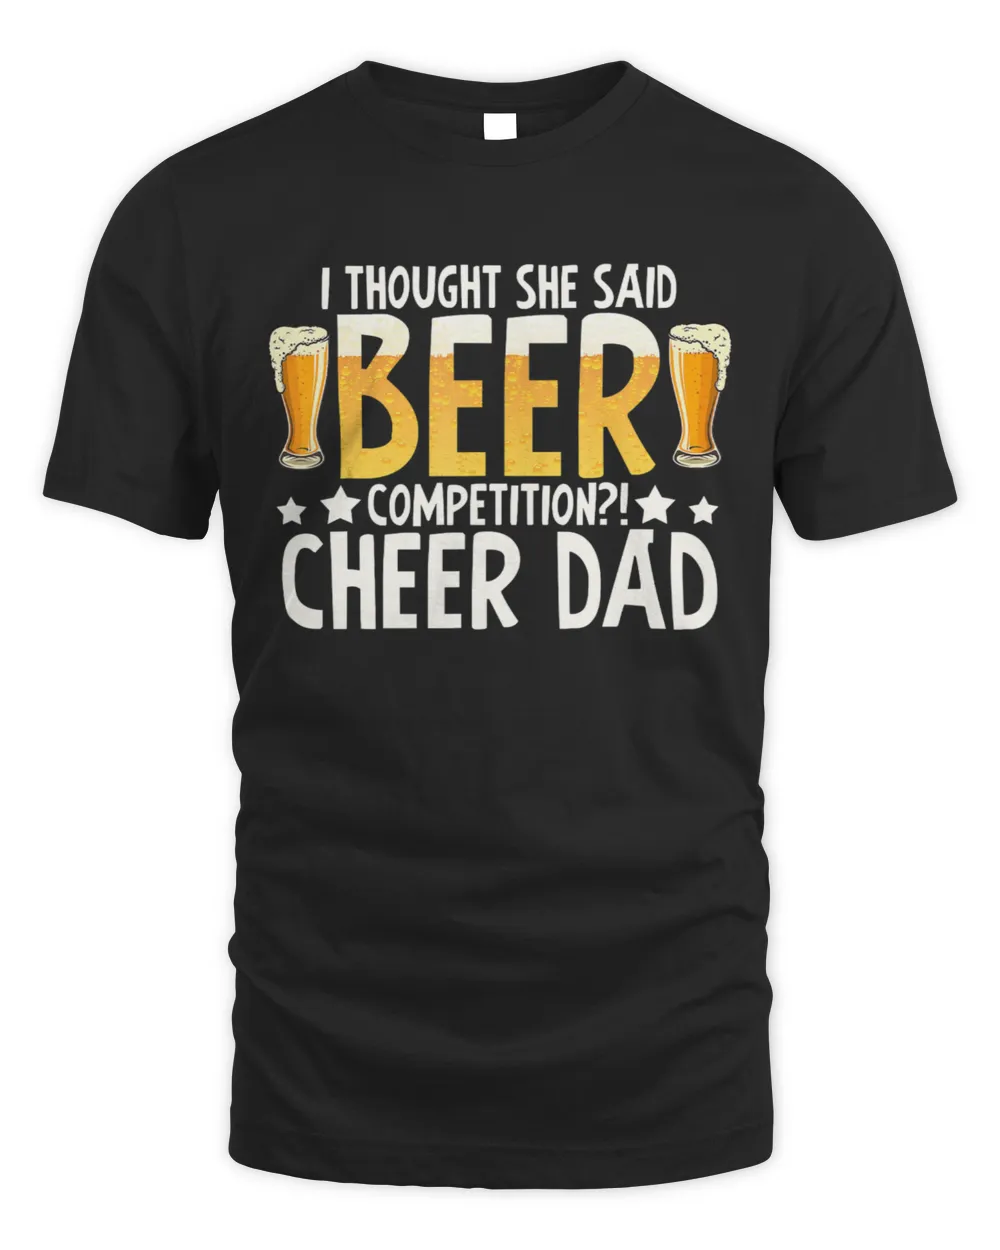 I thought she said beer competition cheer dad T-Shirt T-Shirt